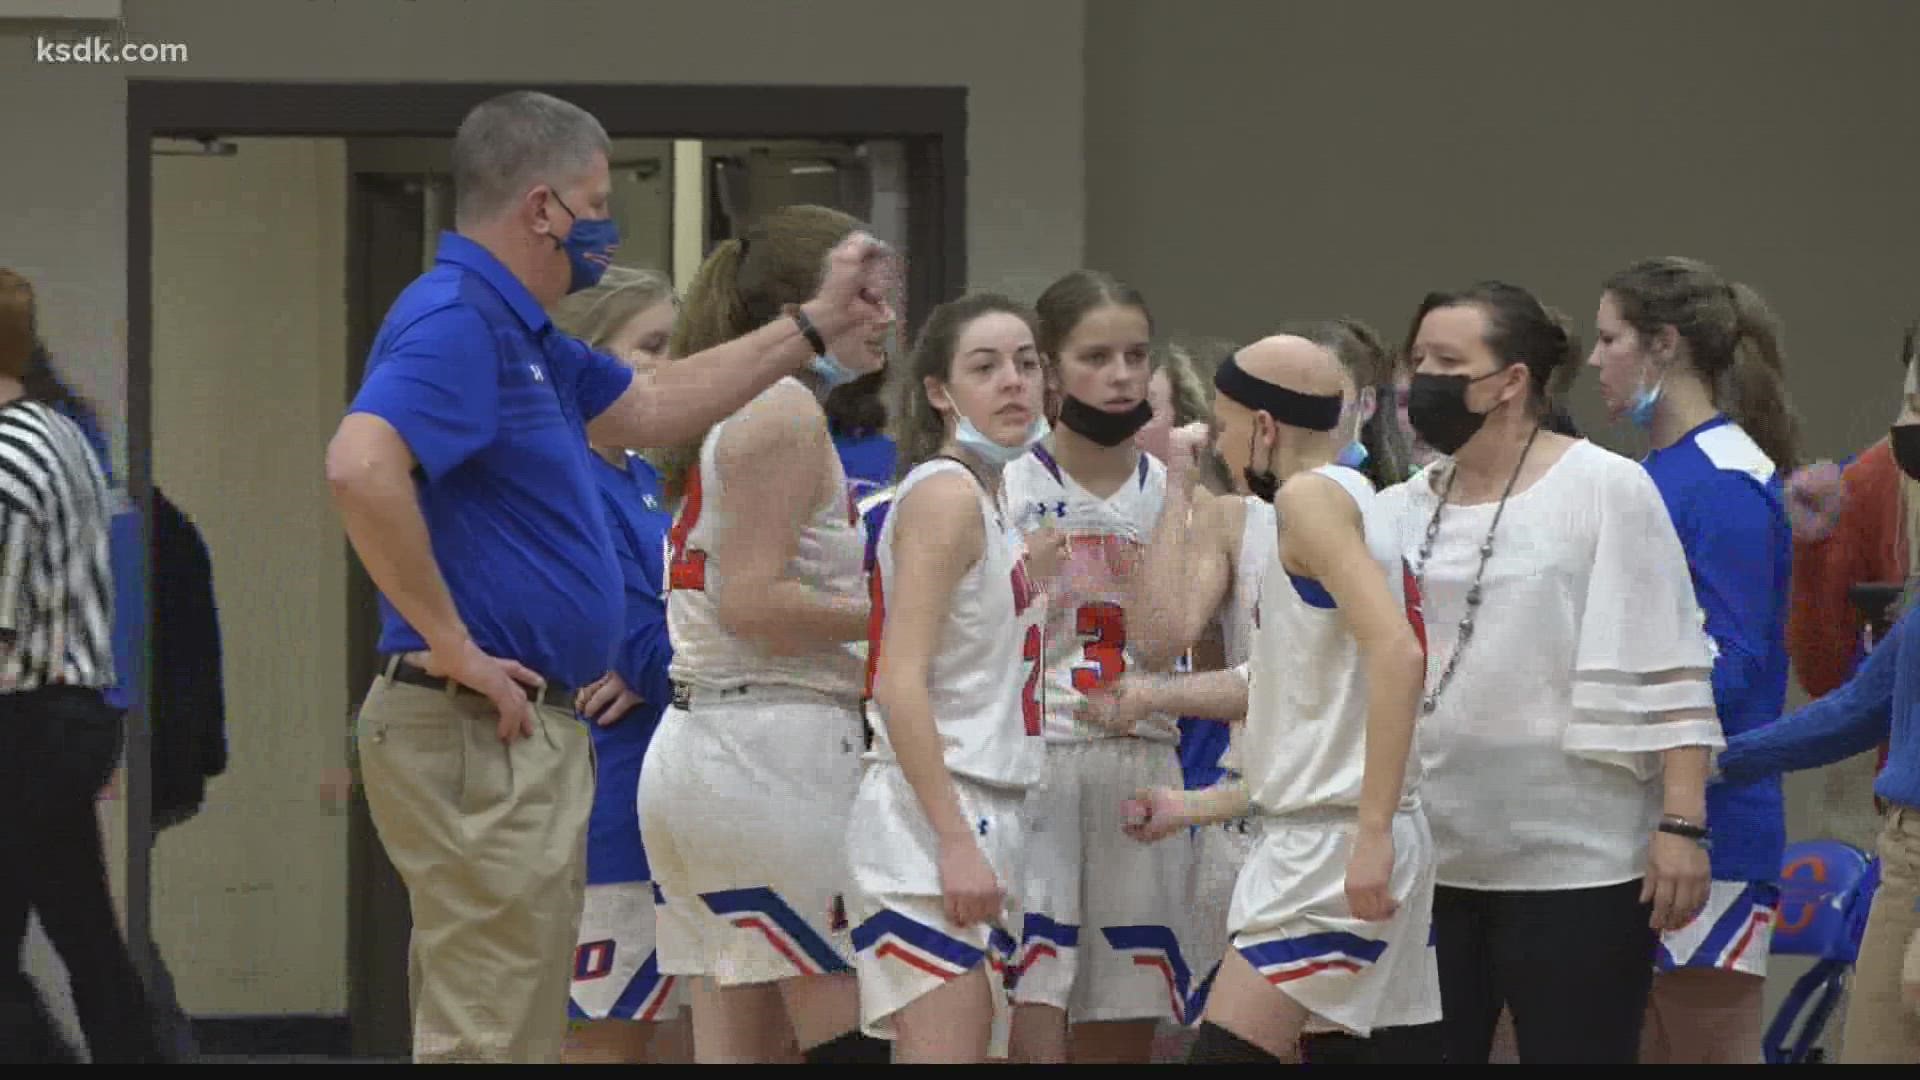 Okawville got the big win, 60-18 and stayed unbeaten on the season. They are now 21-0.